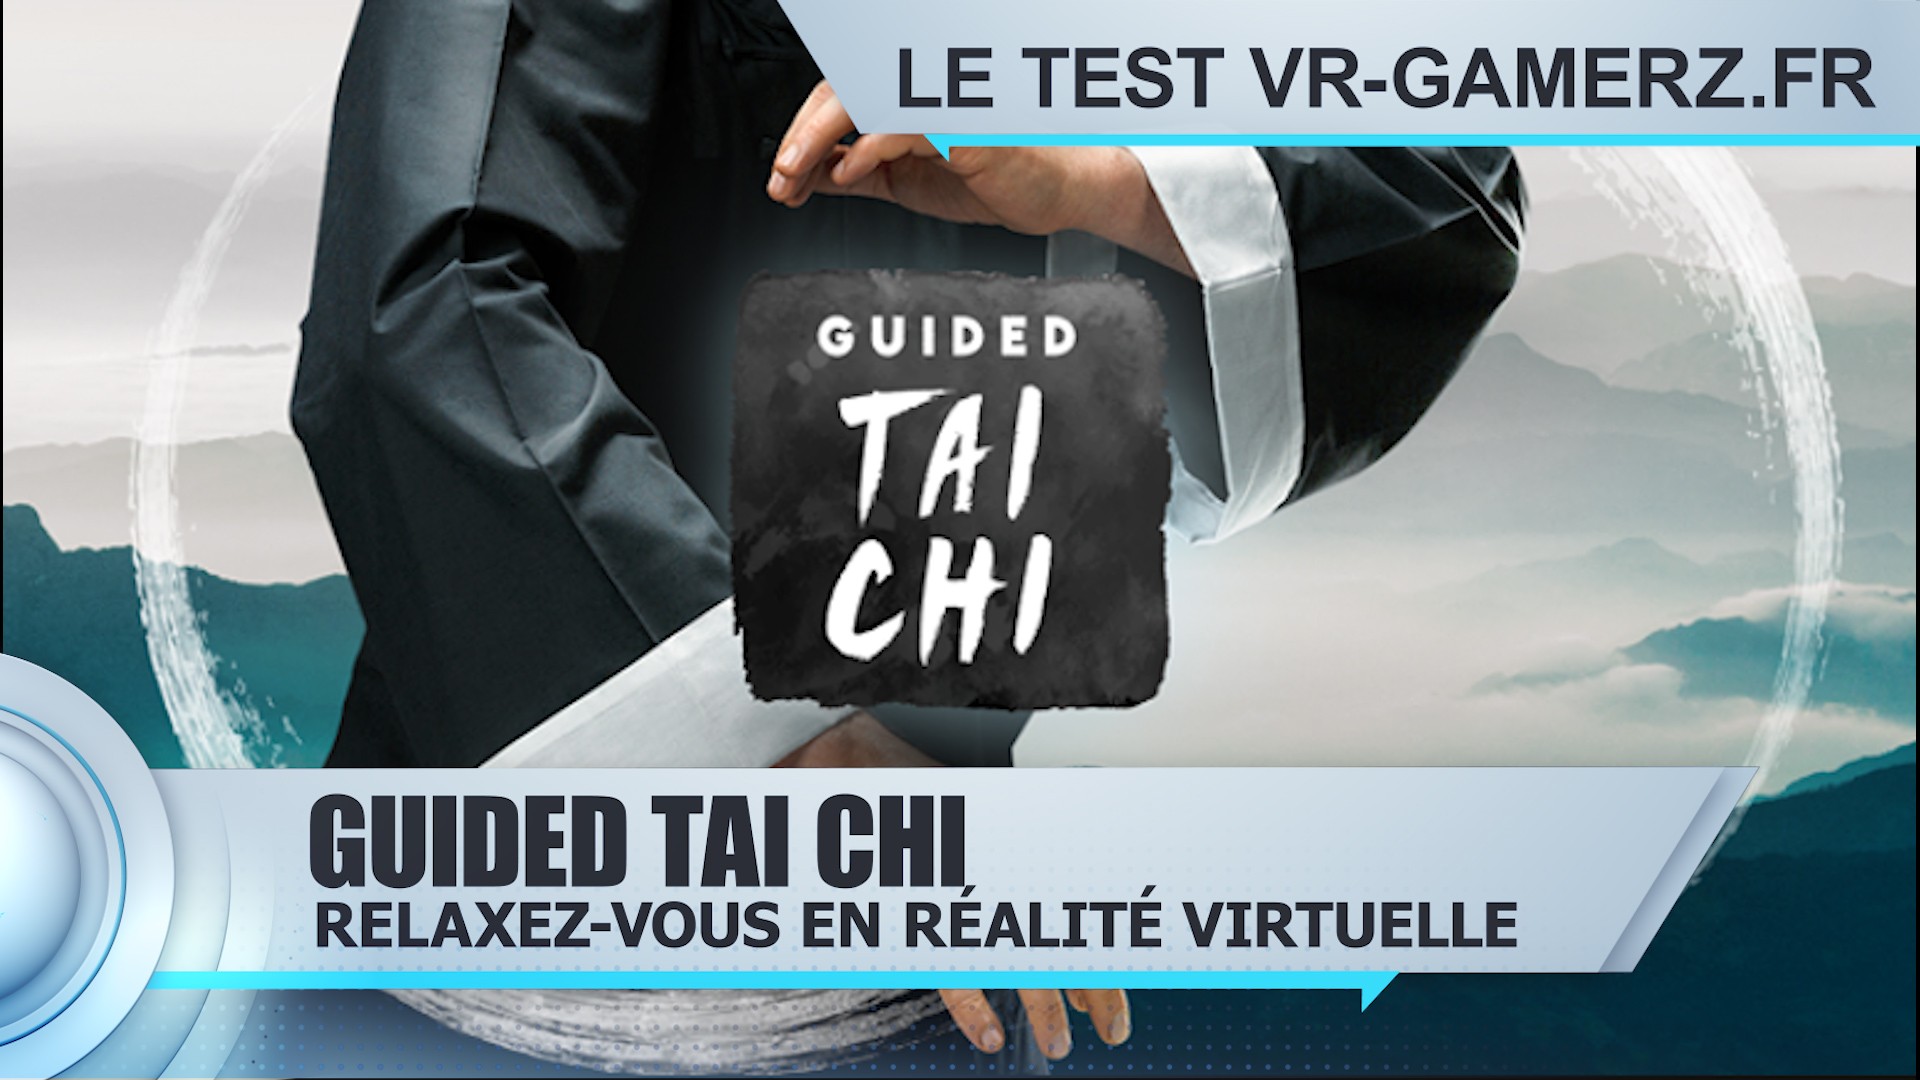 Test Guided tai chi Oculus quest